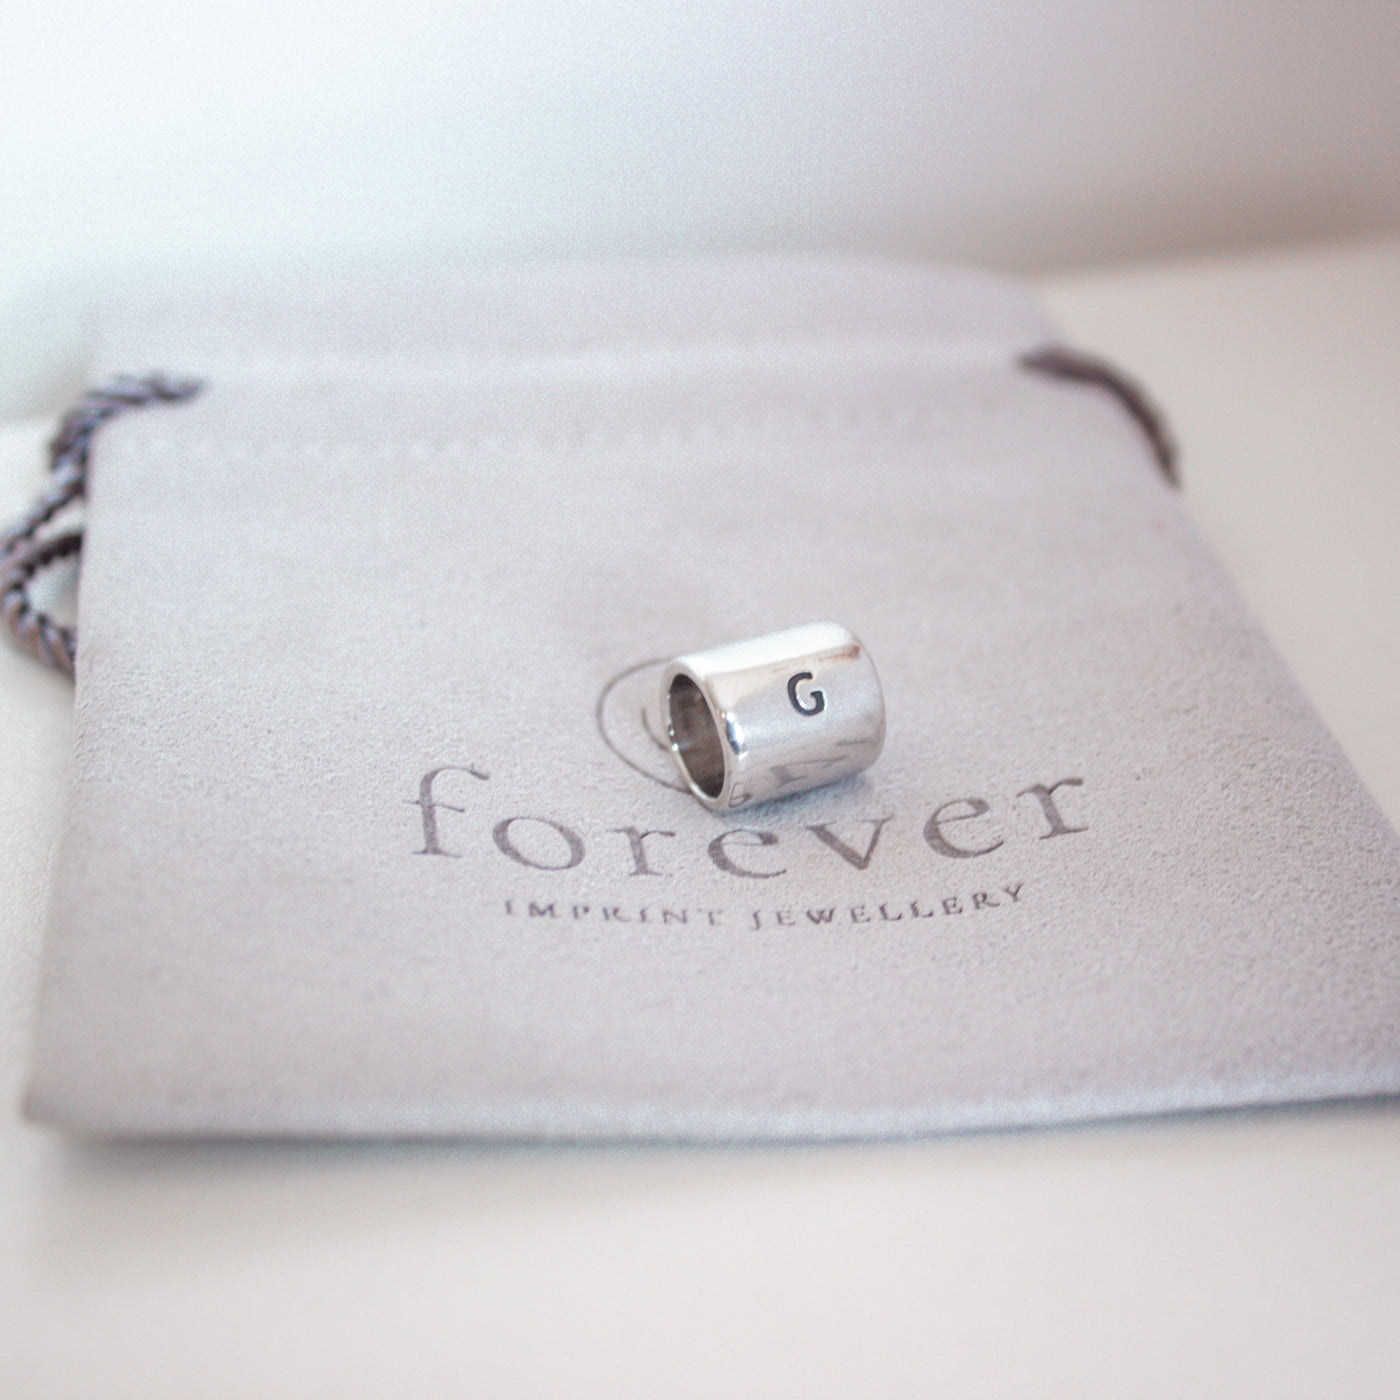 PERSONALIZED HAND, FOOT AND OR FINGERPRINT BEAD |  FOREVER IMPRINT JEWELLERY